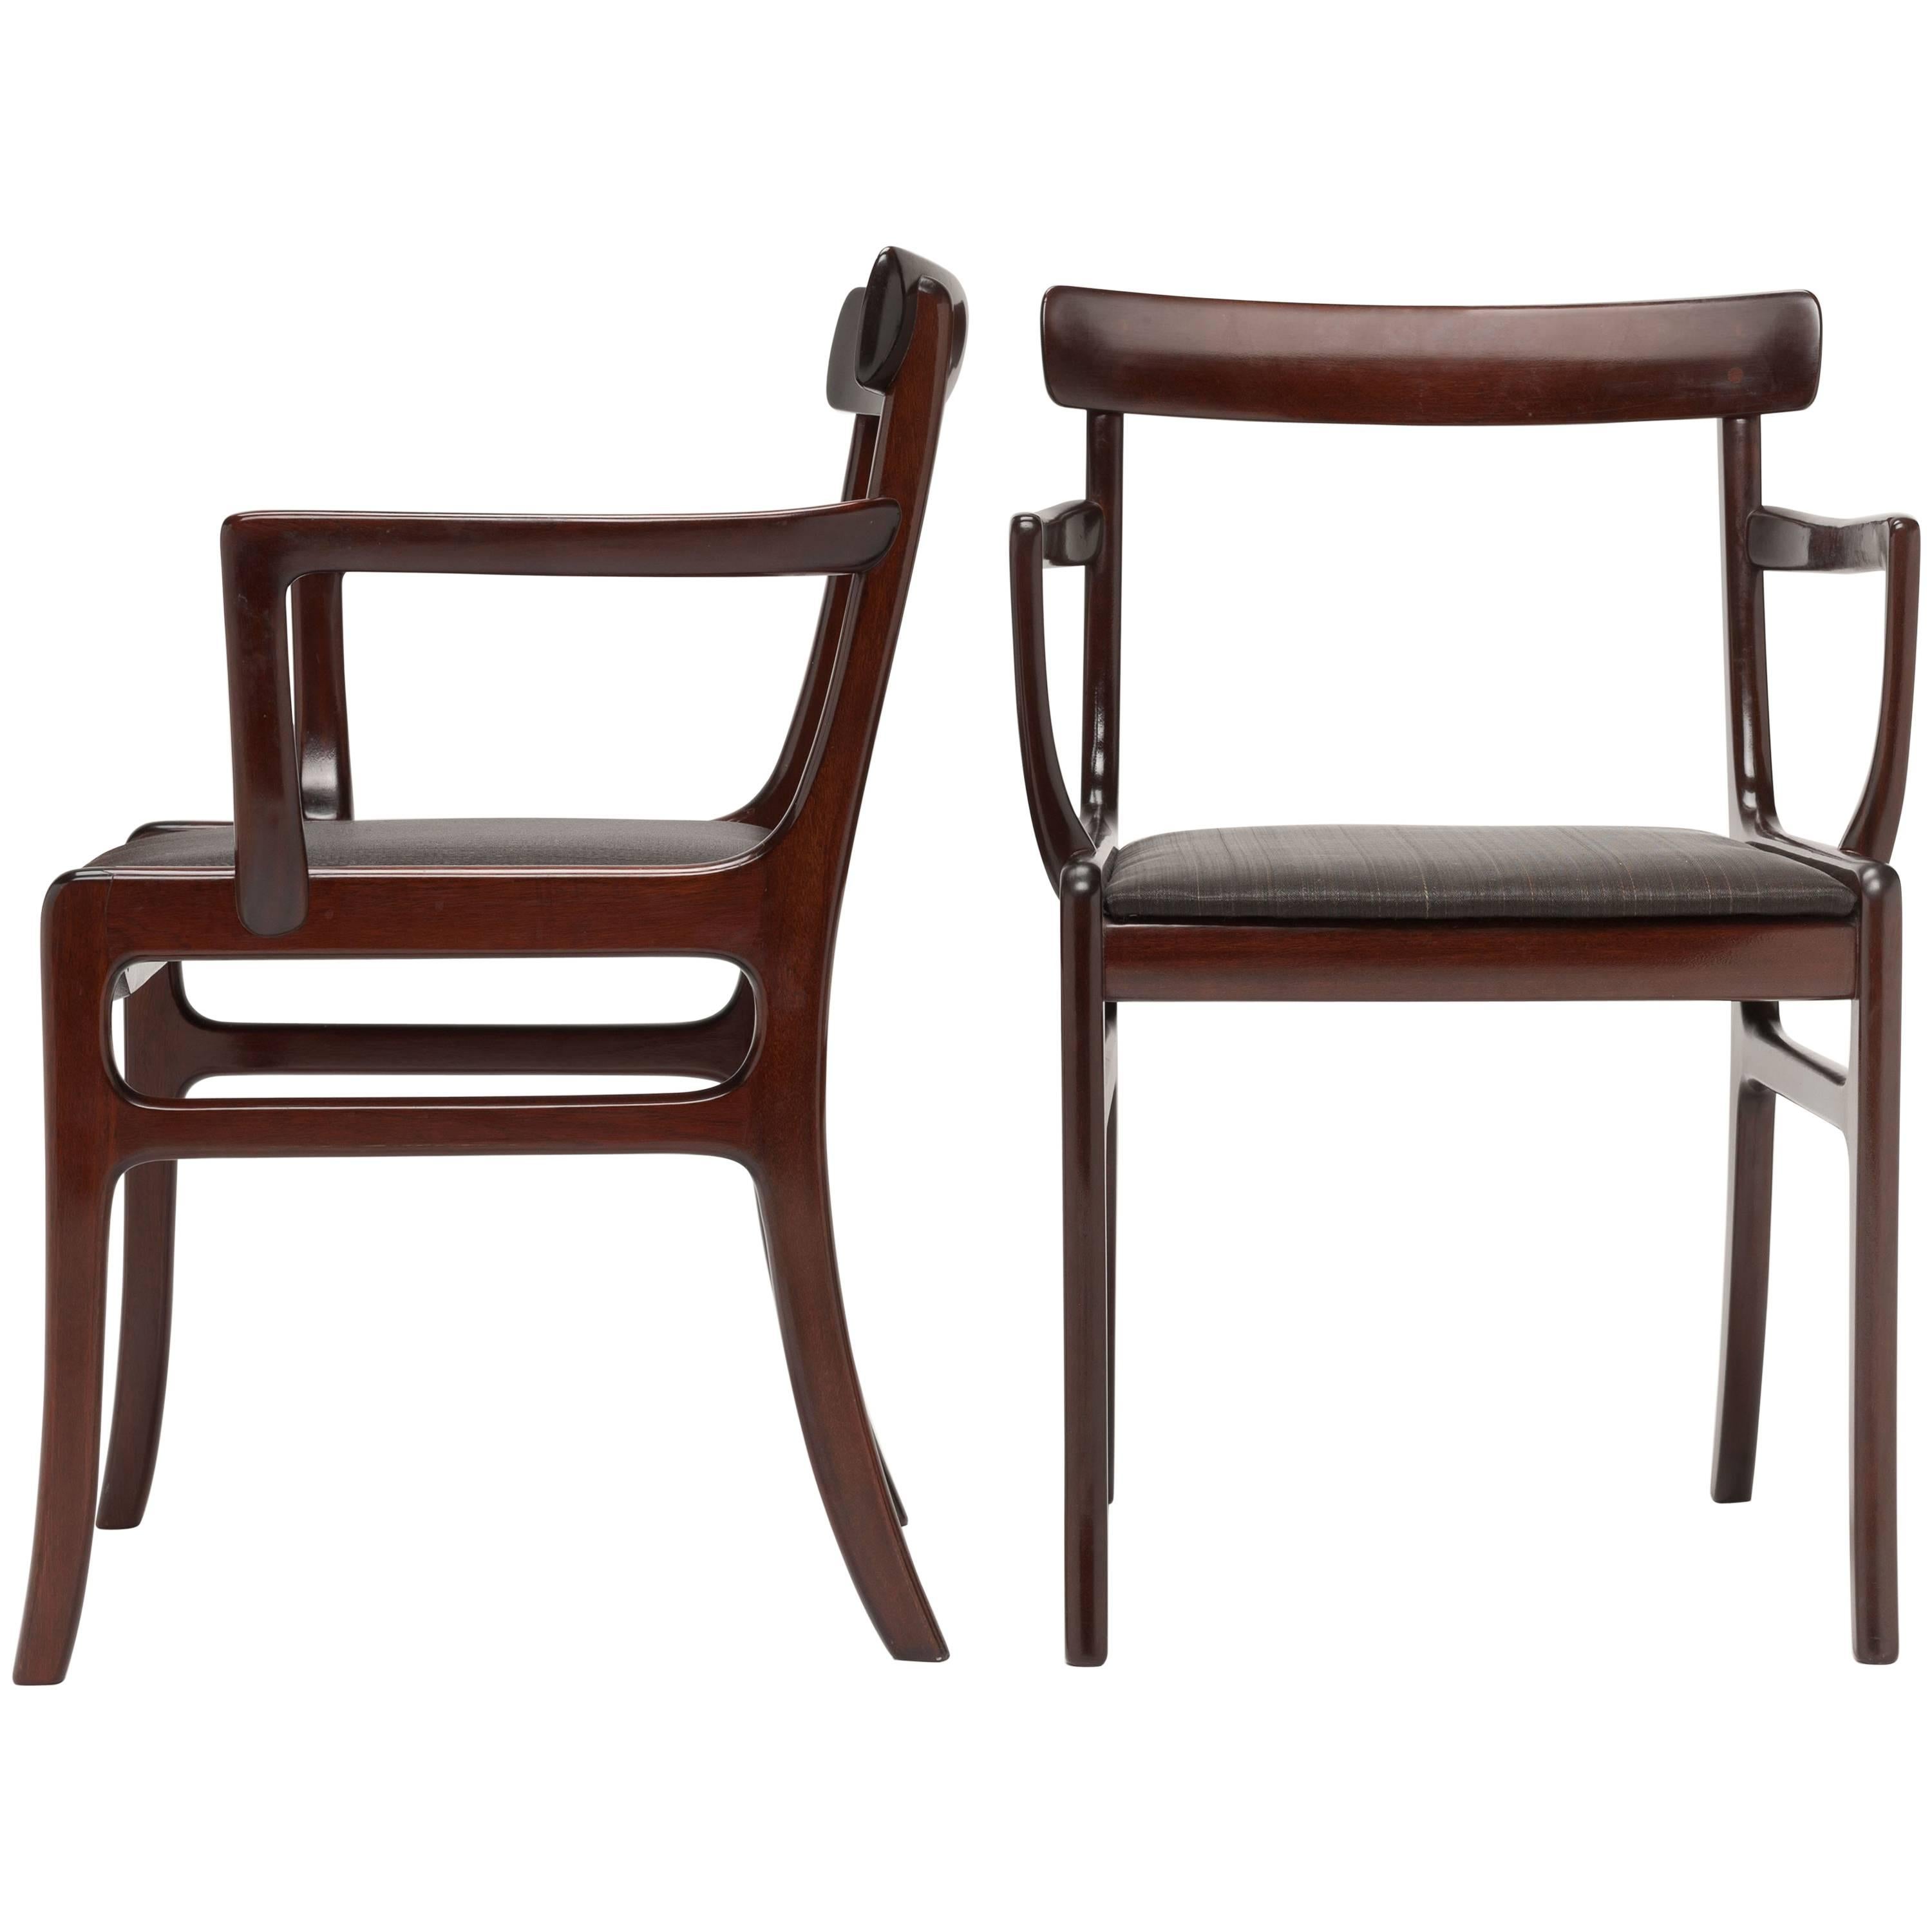 Pair of Armchairs in Horsehair Upholstery by Ole Wanscher, Denmark, 1960